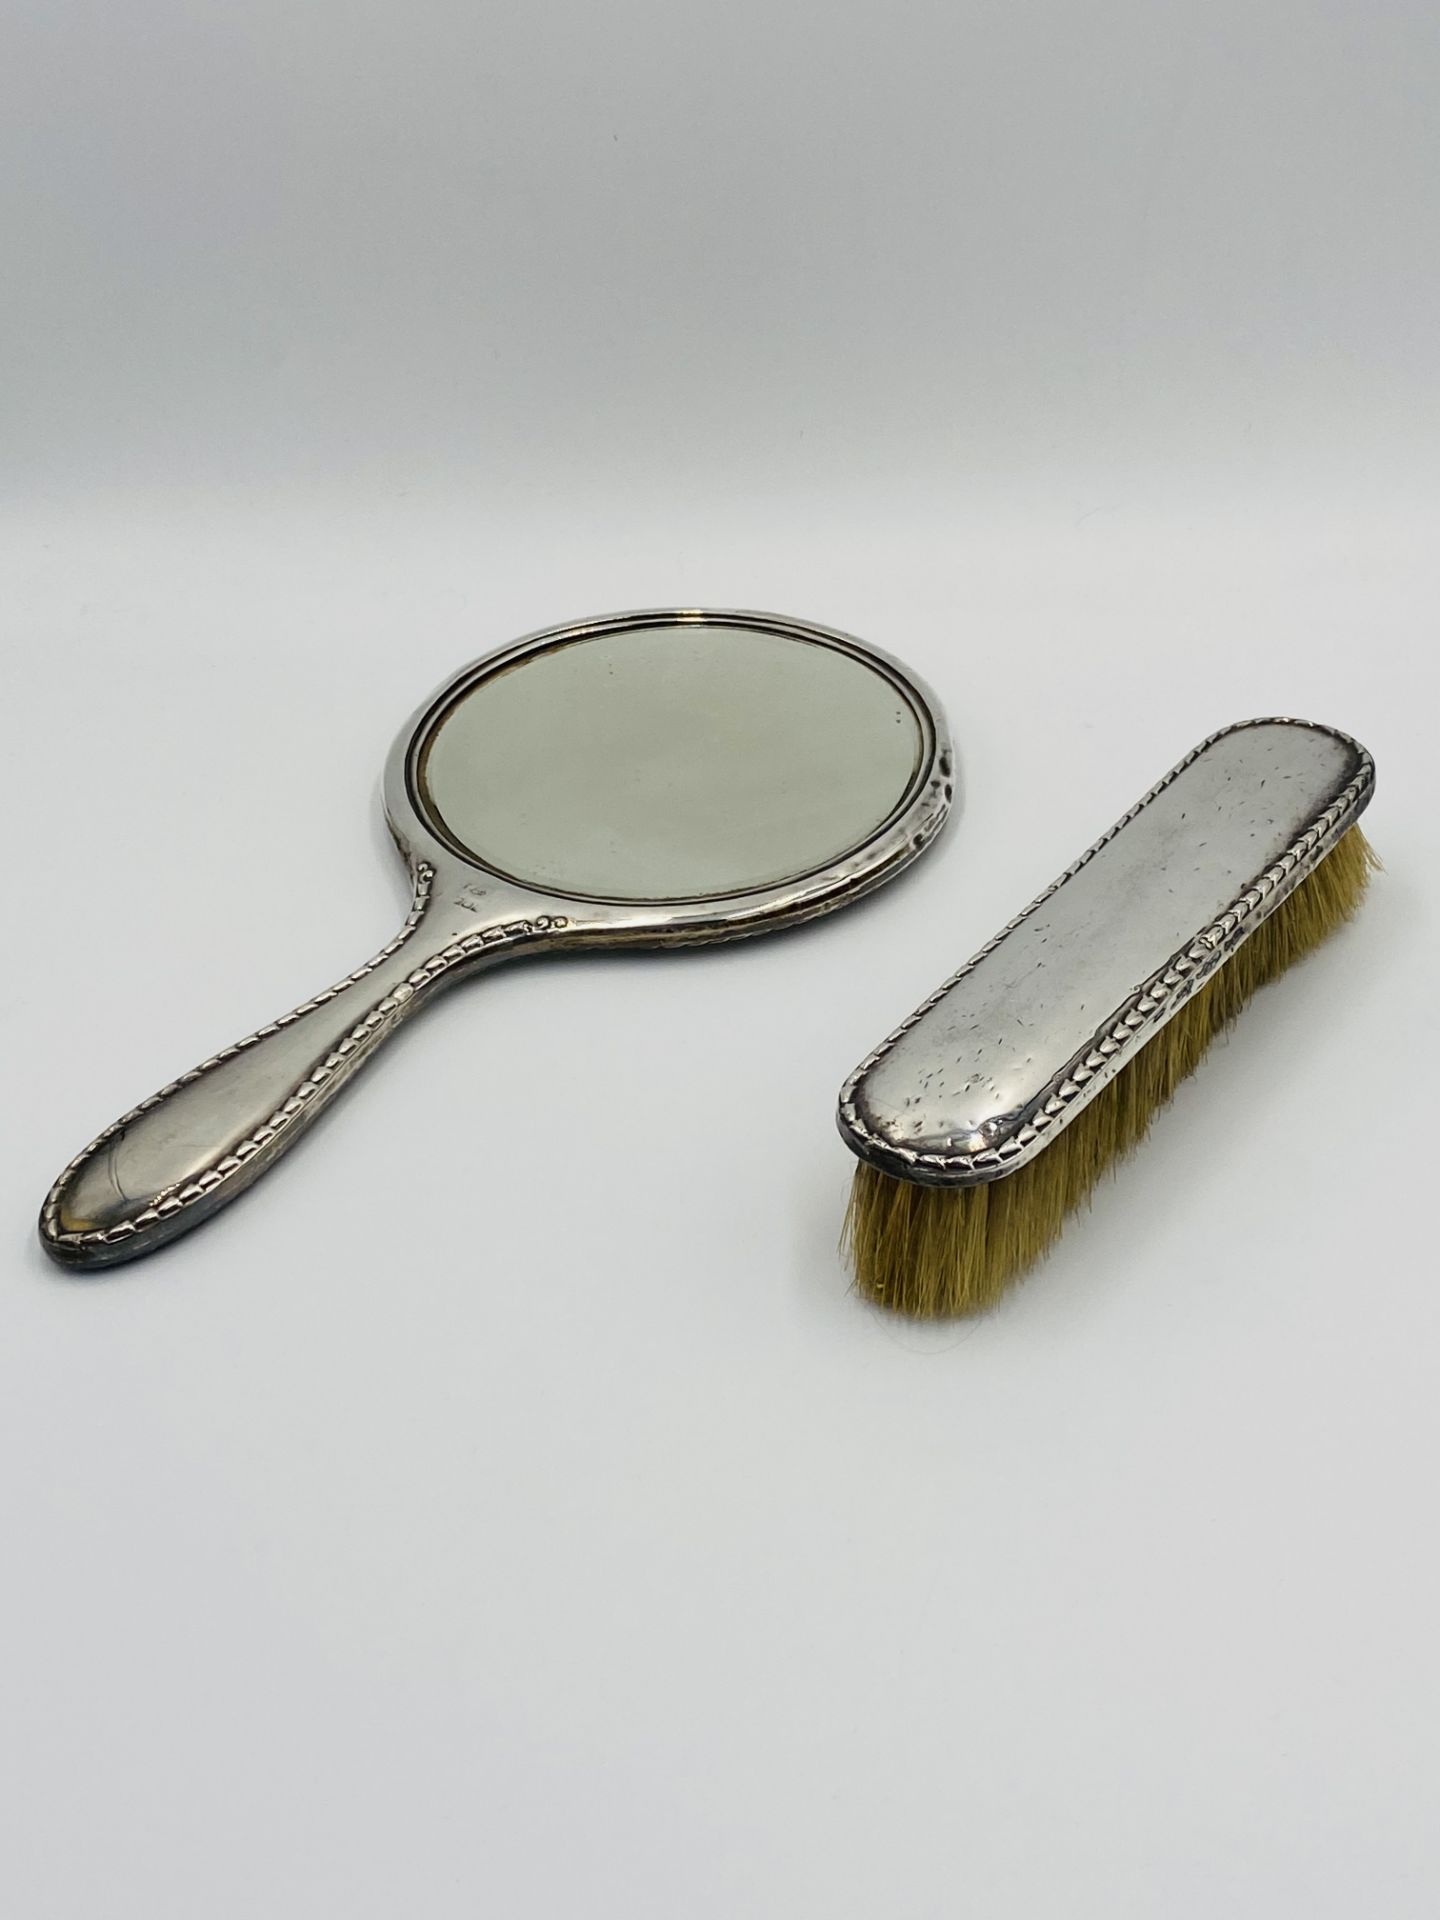 Silver backed dressing table mirror and brush - Image 2 of 6